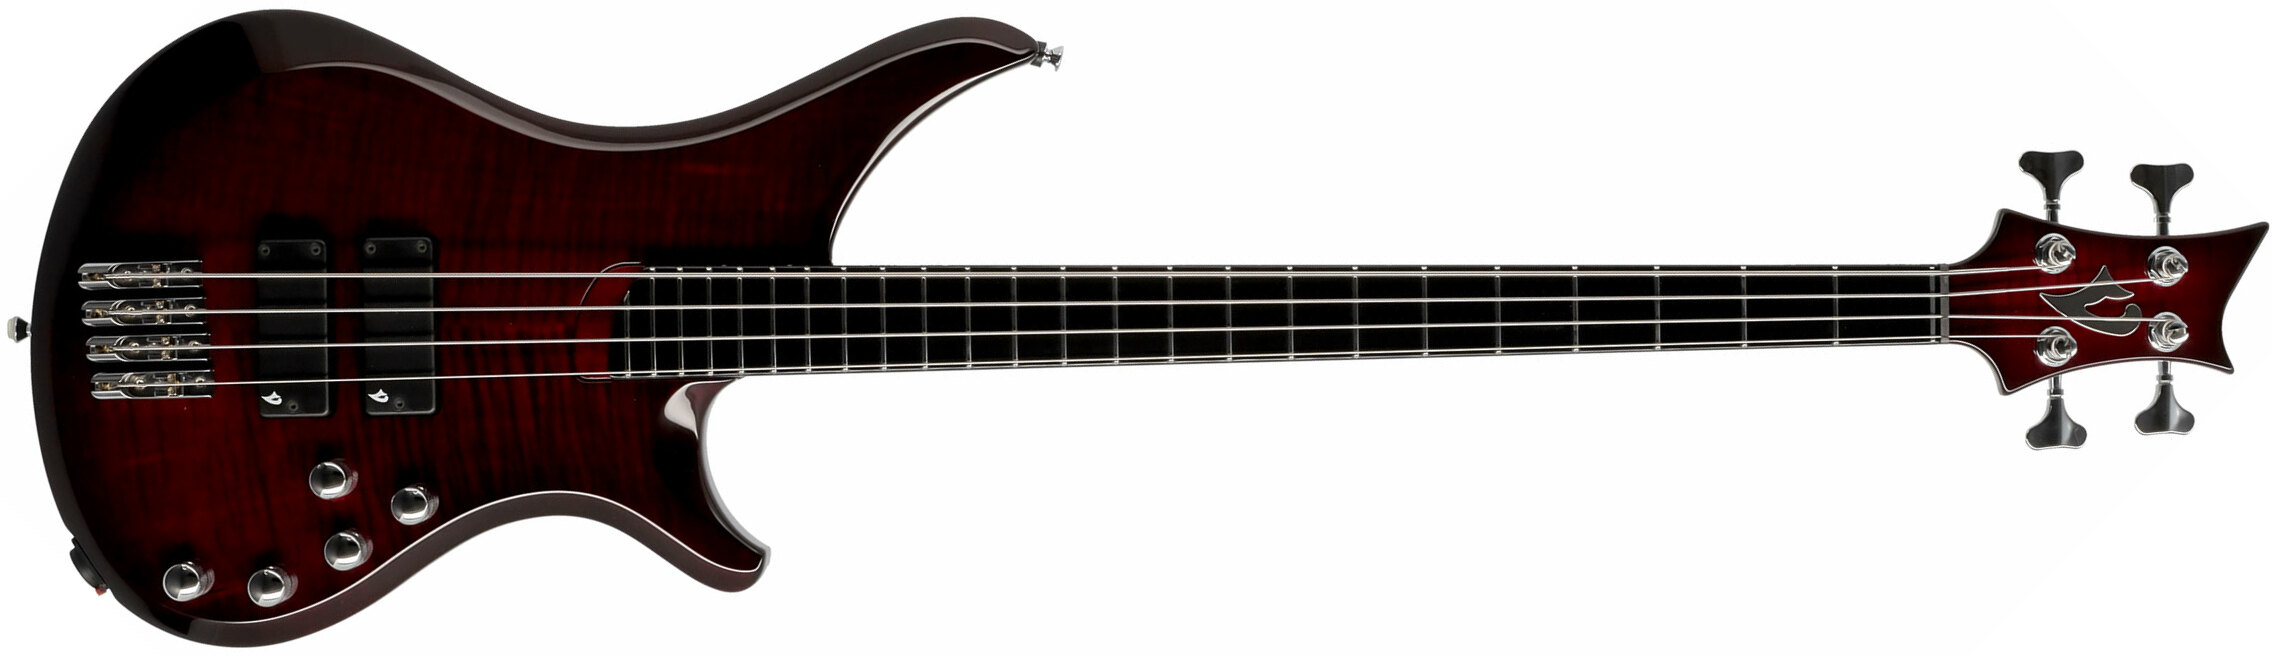 Vigier Passion Iv Active Phe - Deep Burgundy - Solid body electric bass - Main picture